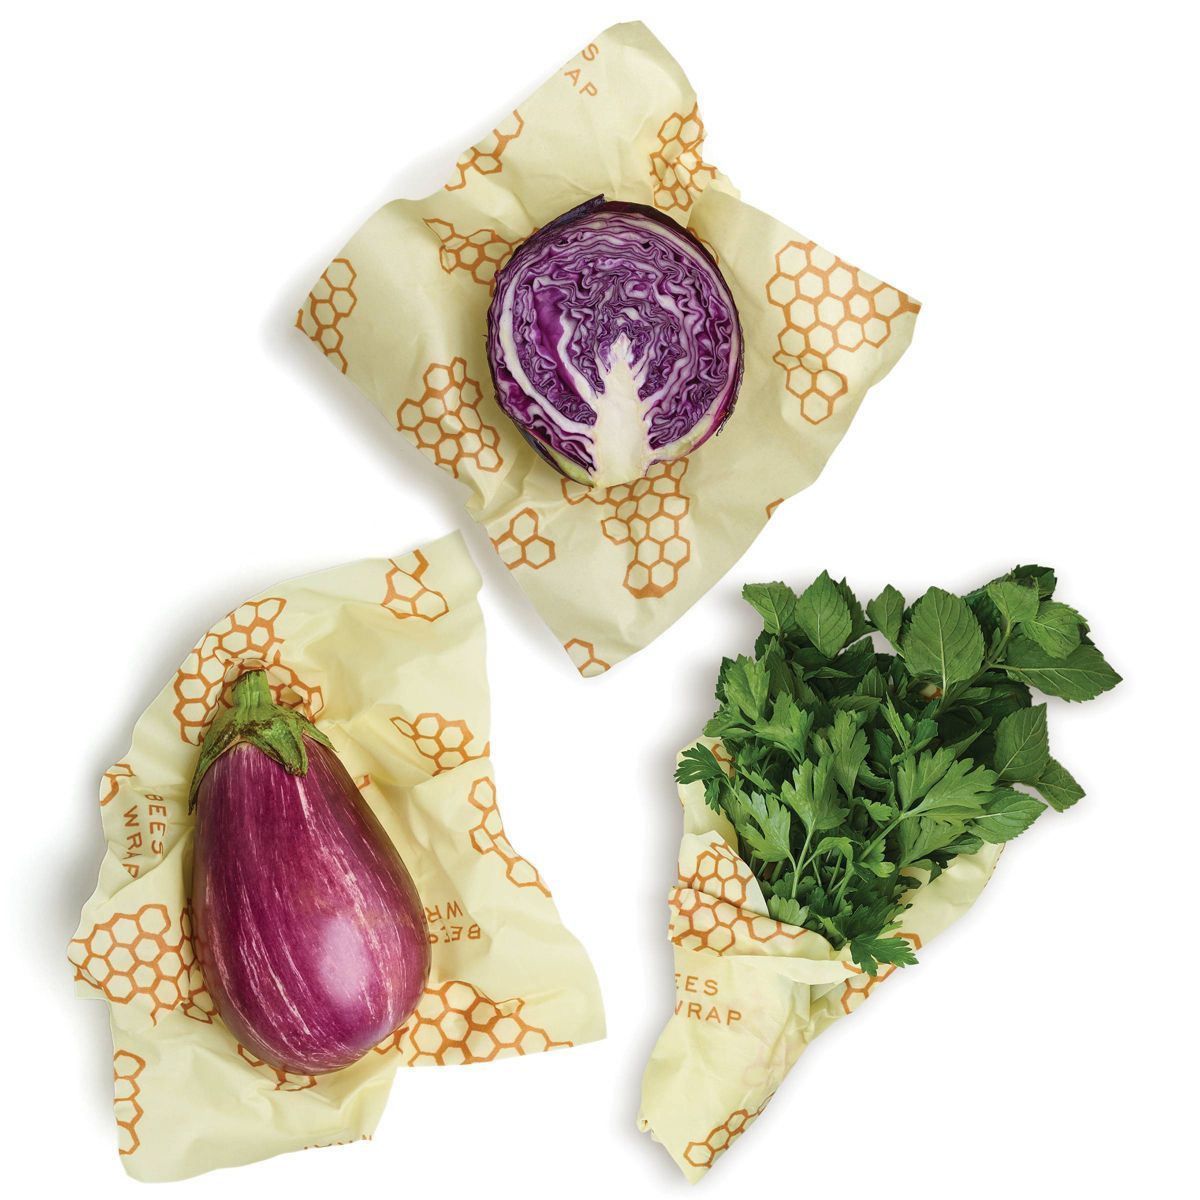 Bee's Wrap Large 3pk Eco Friendly Reusable Food Wraps Sustainable Plastic Free Food Storage | Target